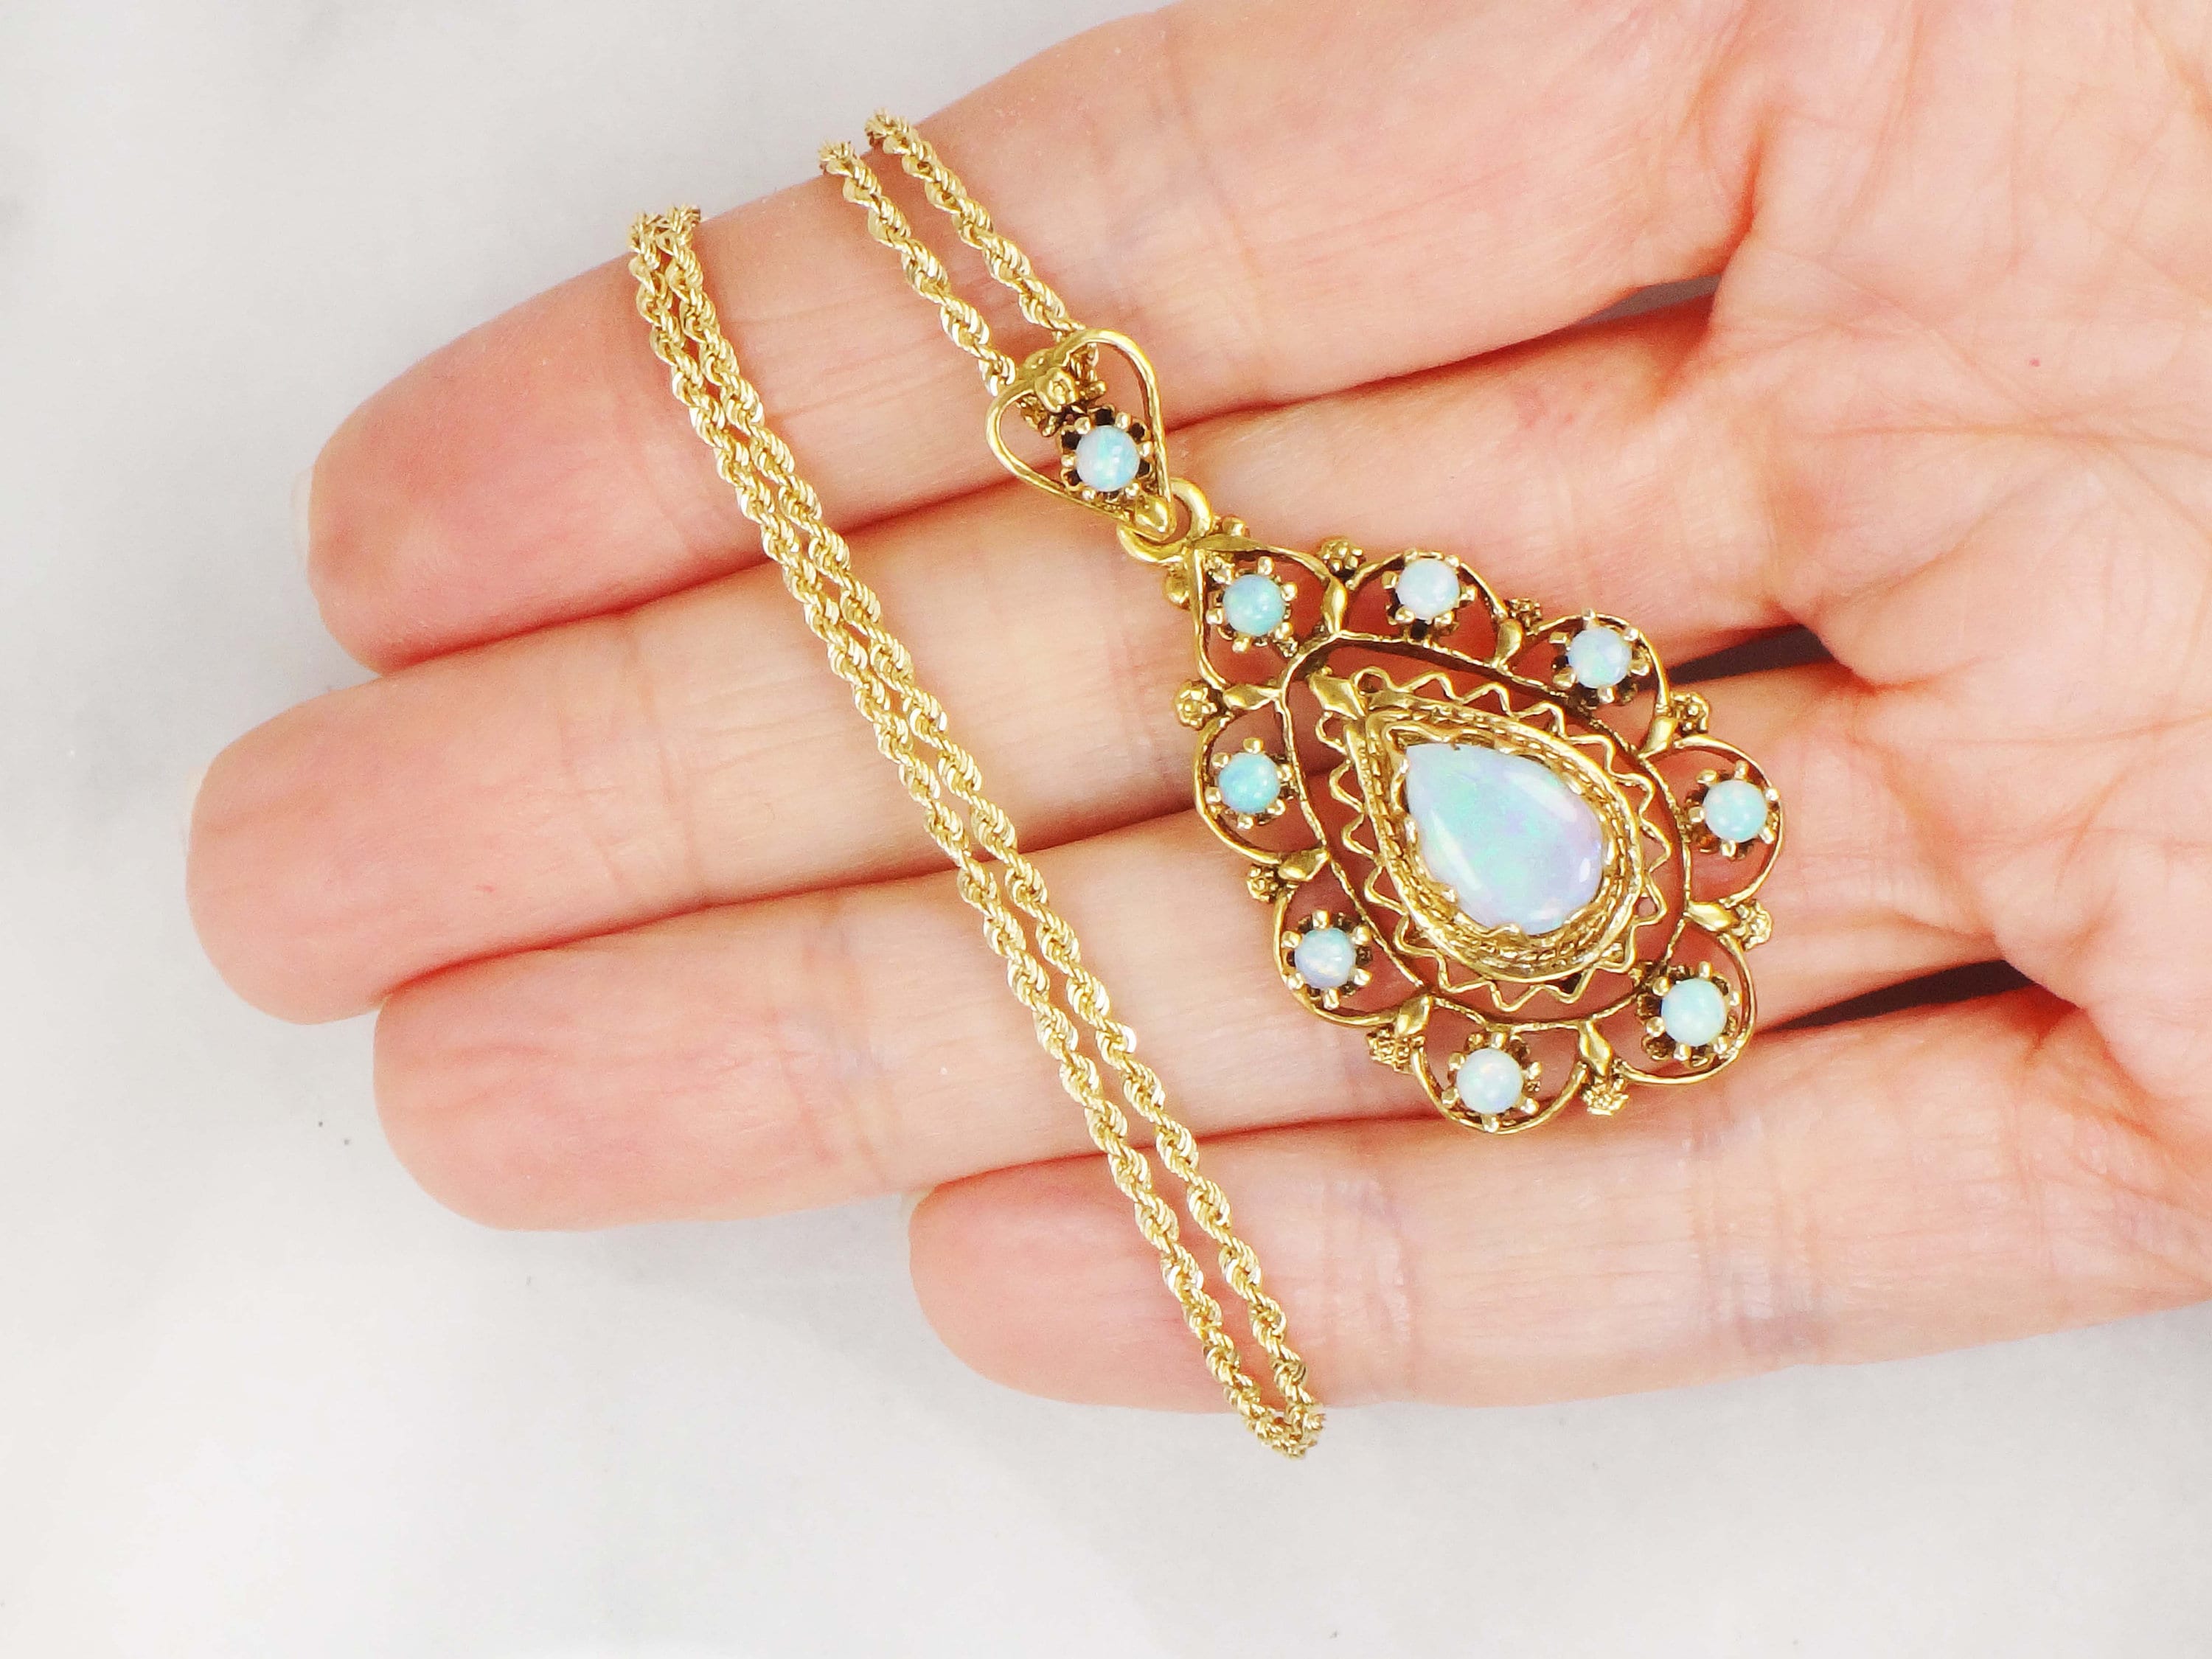 Buy Vintage Opal Pendant Necklace Floating Opals Floating Like a Miniature  Snow Globe Sterling Silver Online in India - Etsy